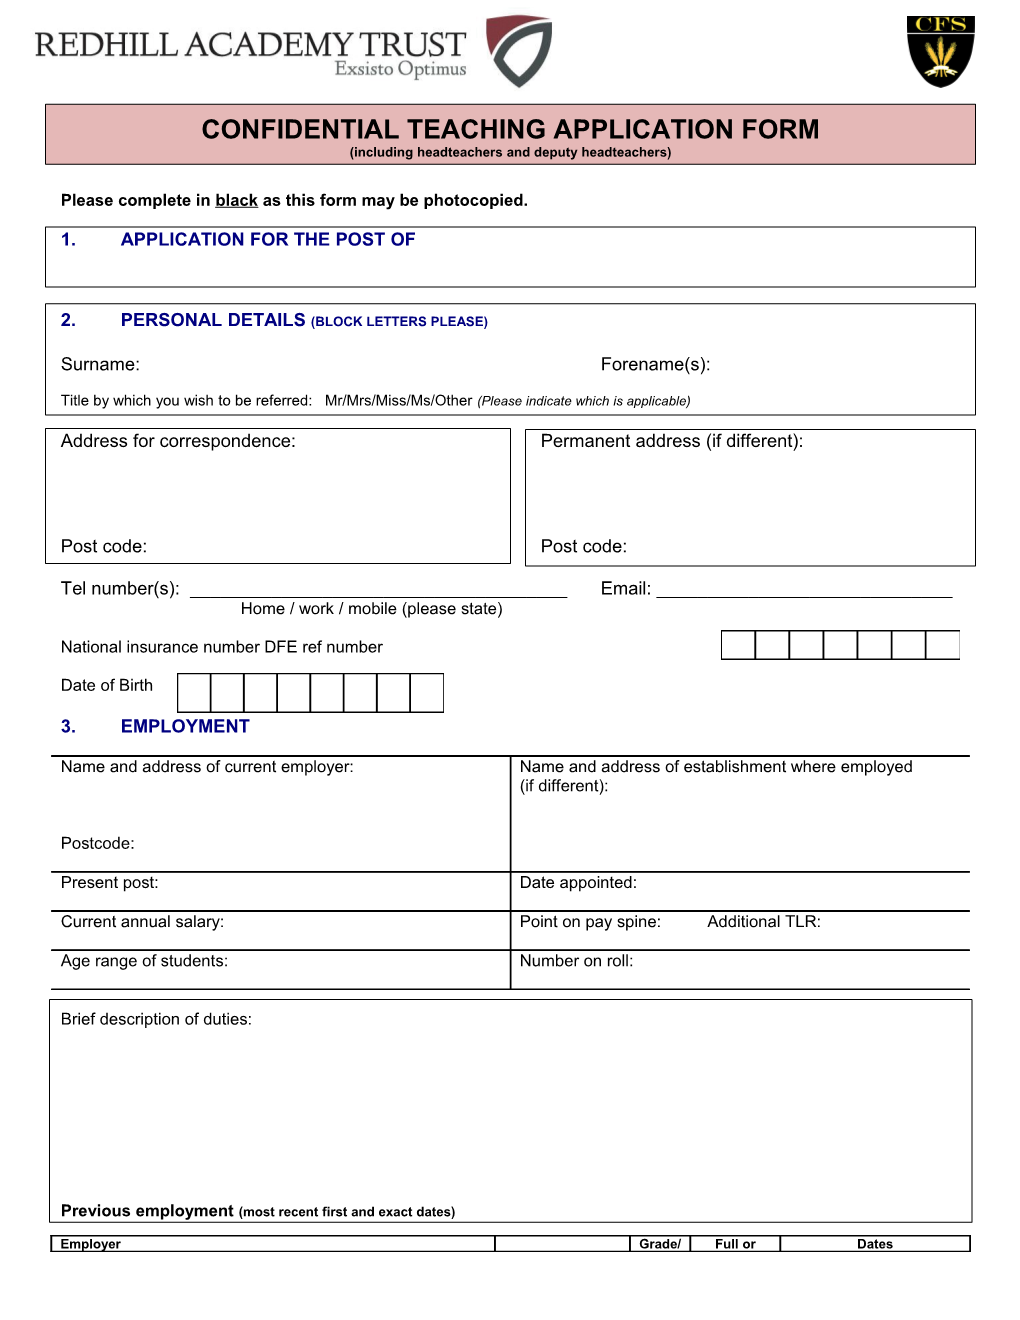 Confidential Teaching Application Form